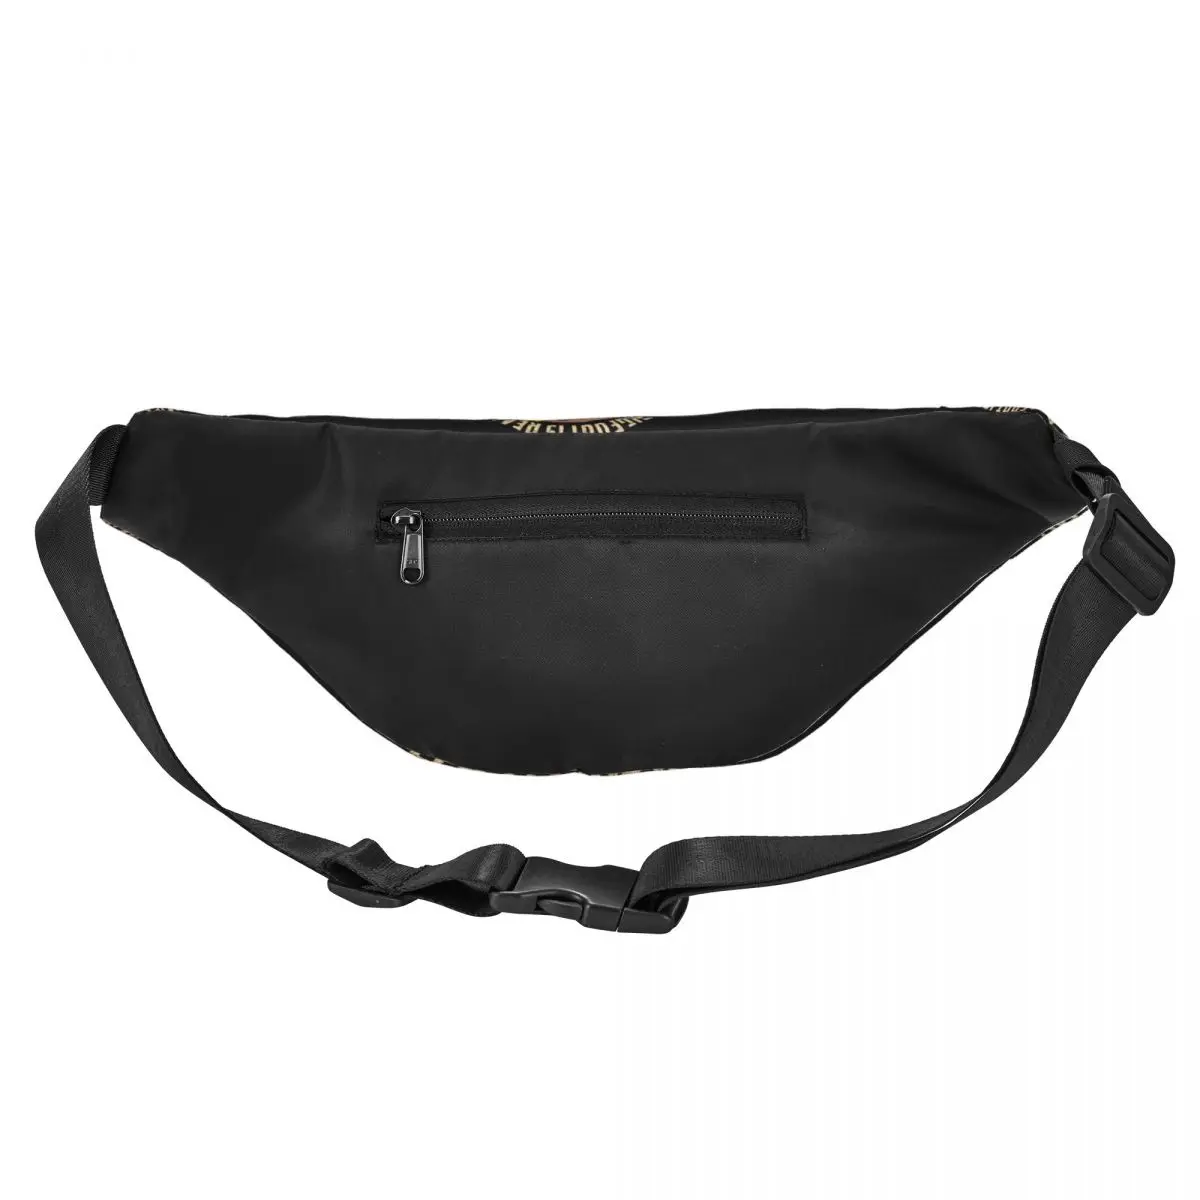 Bigfoot Is Real And He Tried To Eat My Ass Unisex Waist Bag Multifunction Sling Crossbody Bags Chest Bags Short Trip Waist Pack